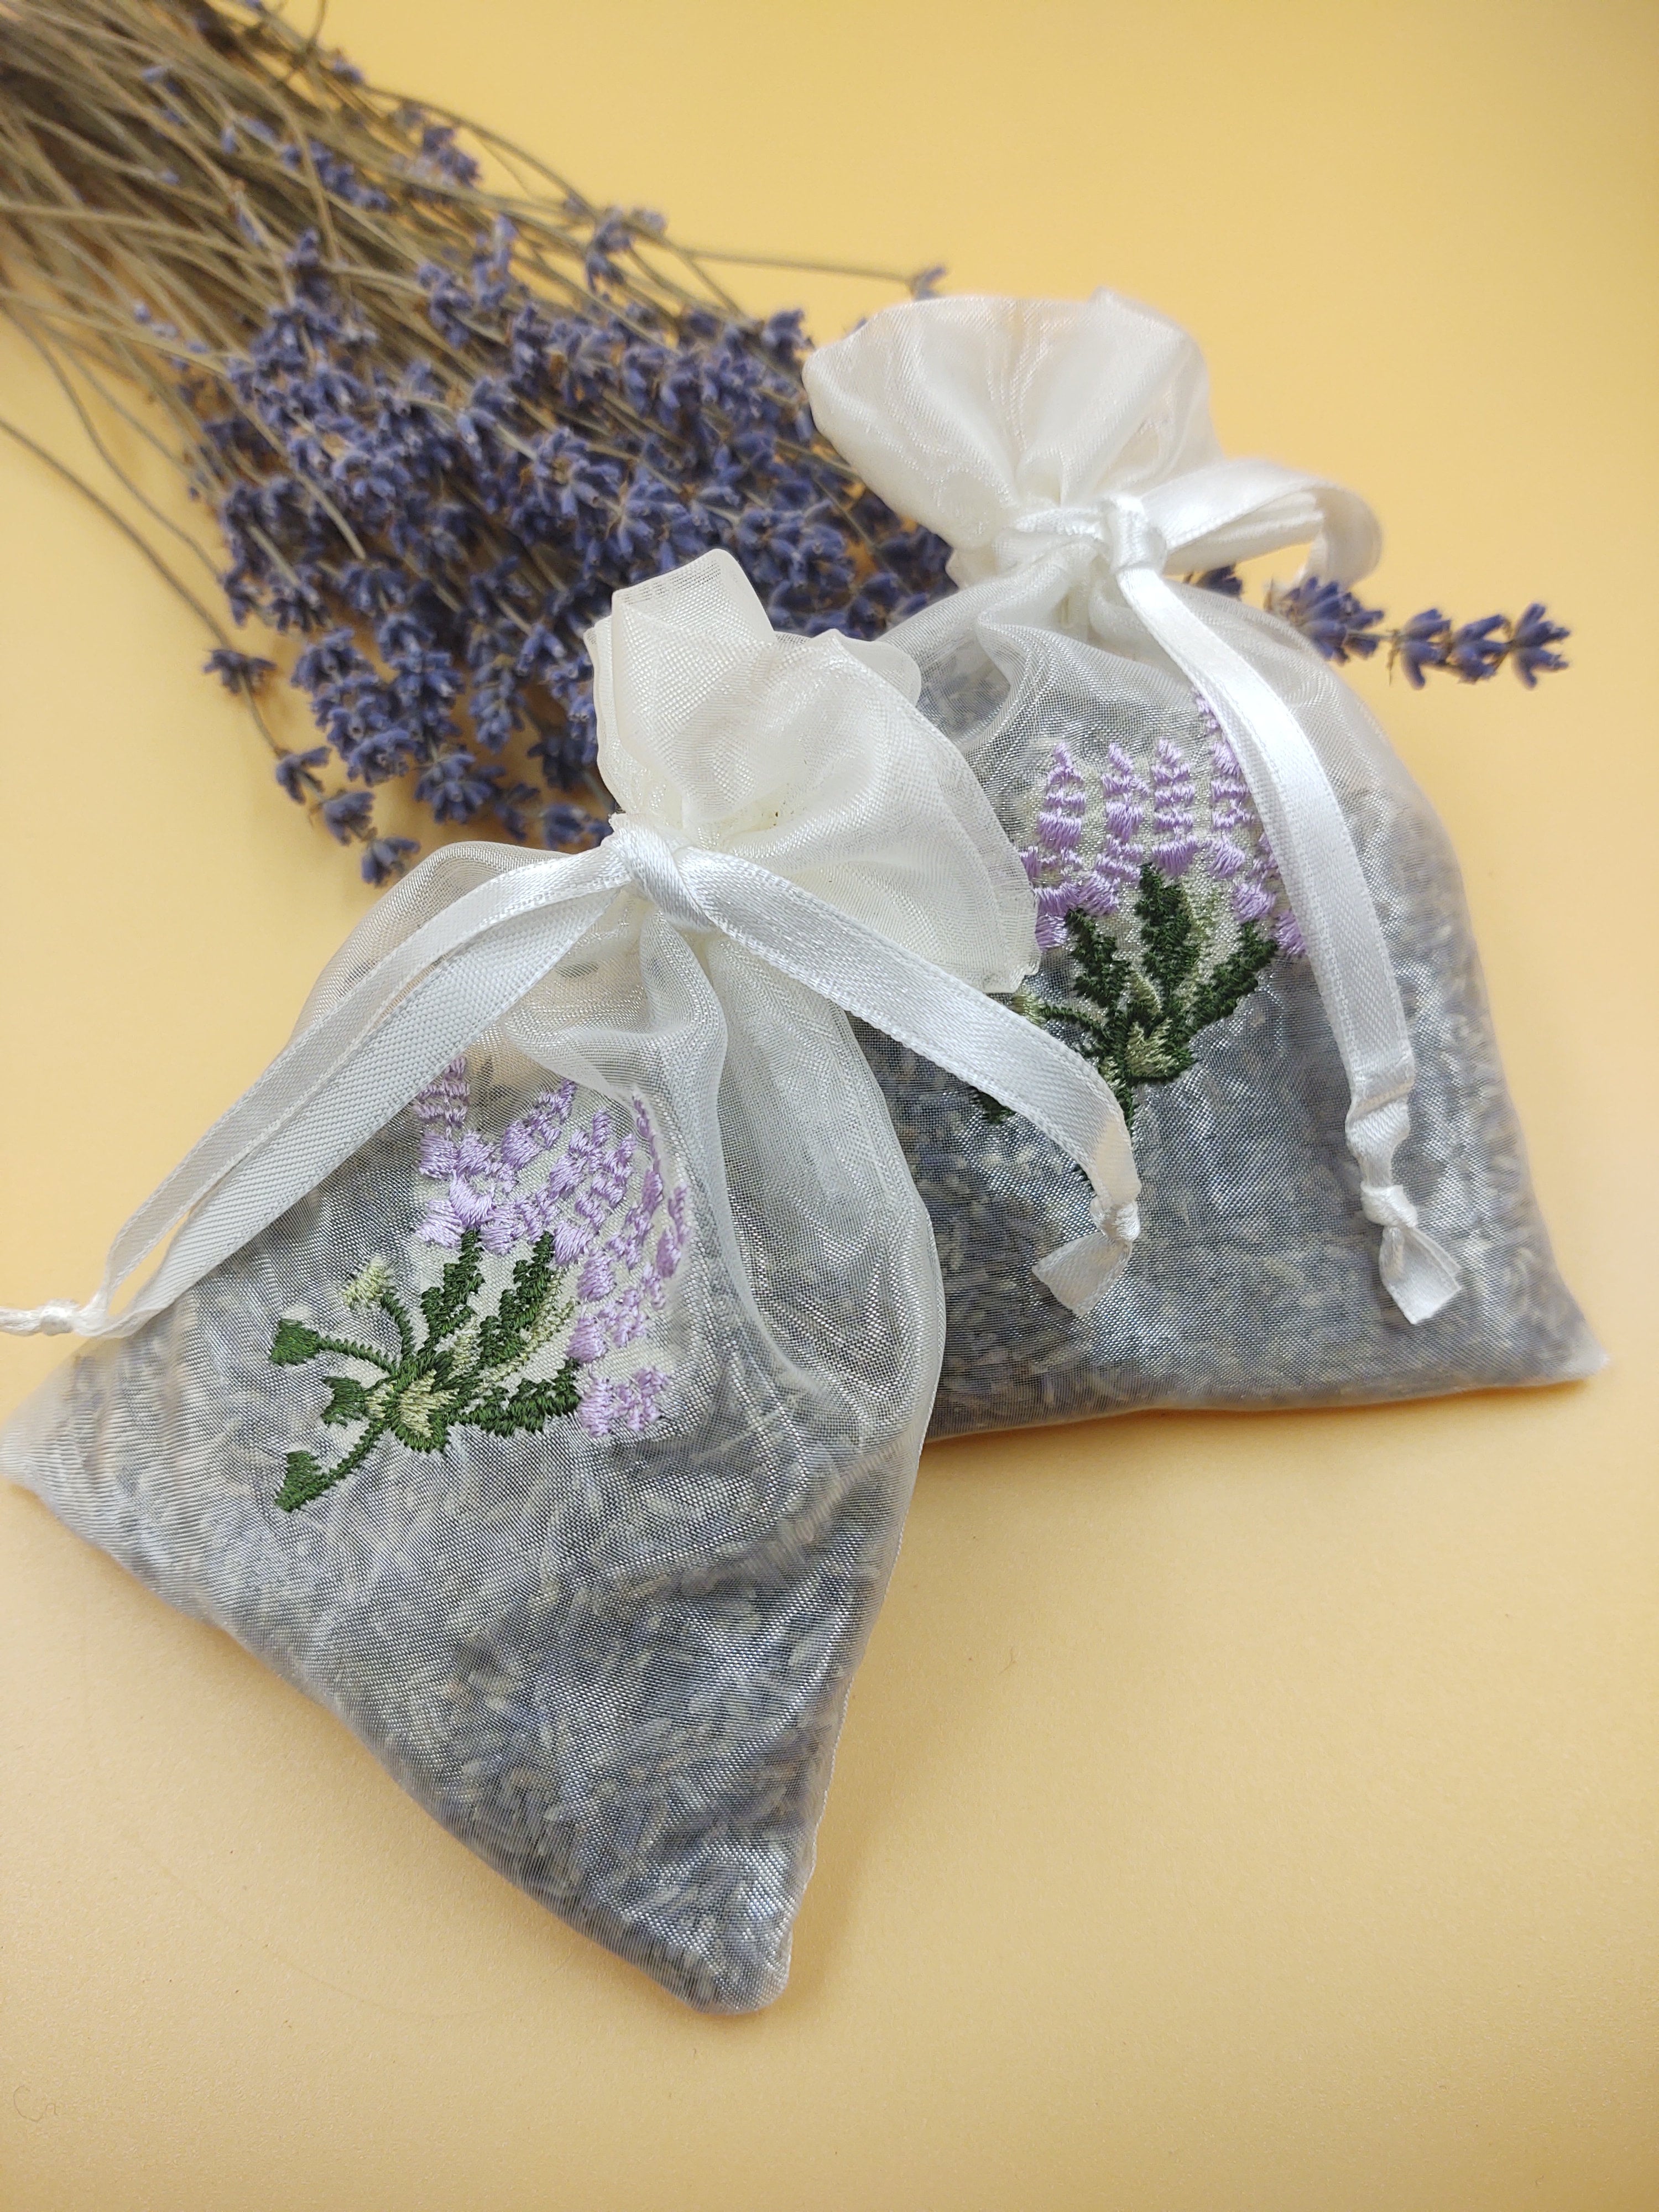 Dried Lavender Bunches - Naturally Grown and Hand Cut Dried Lavender Bunches